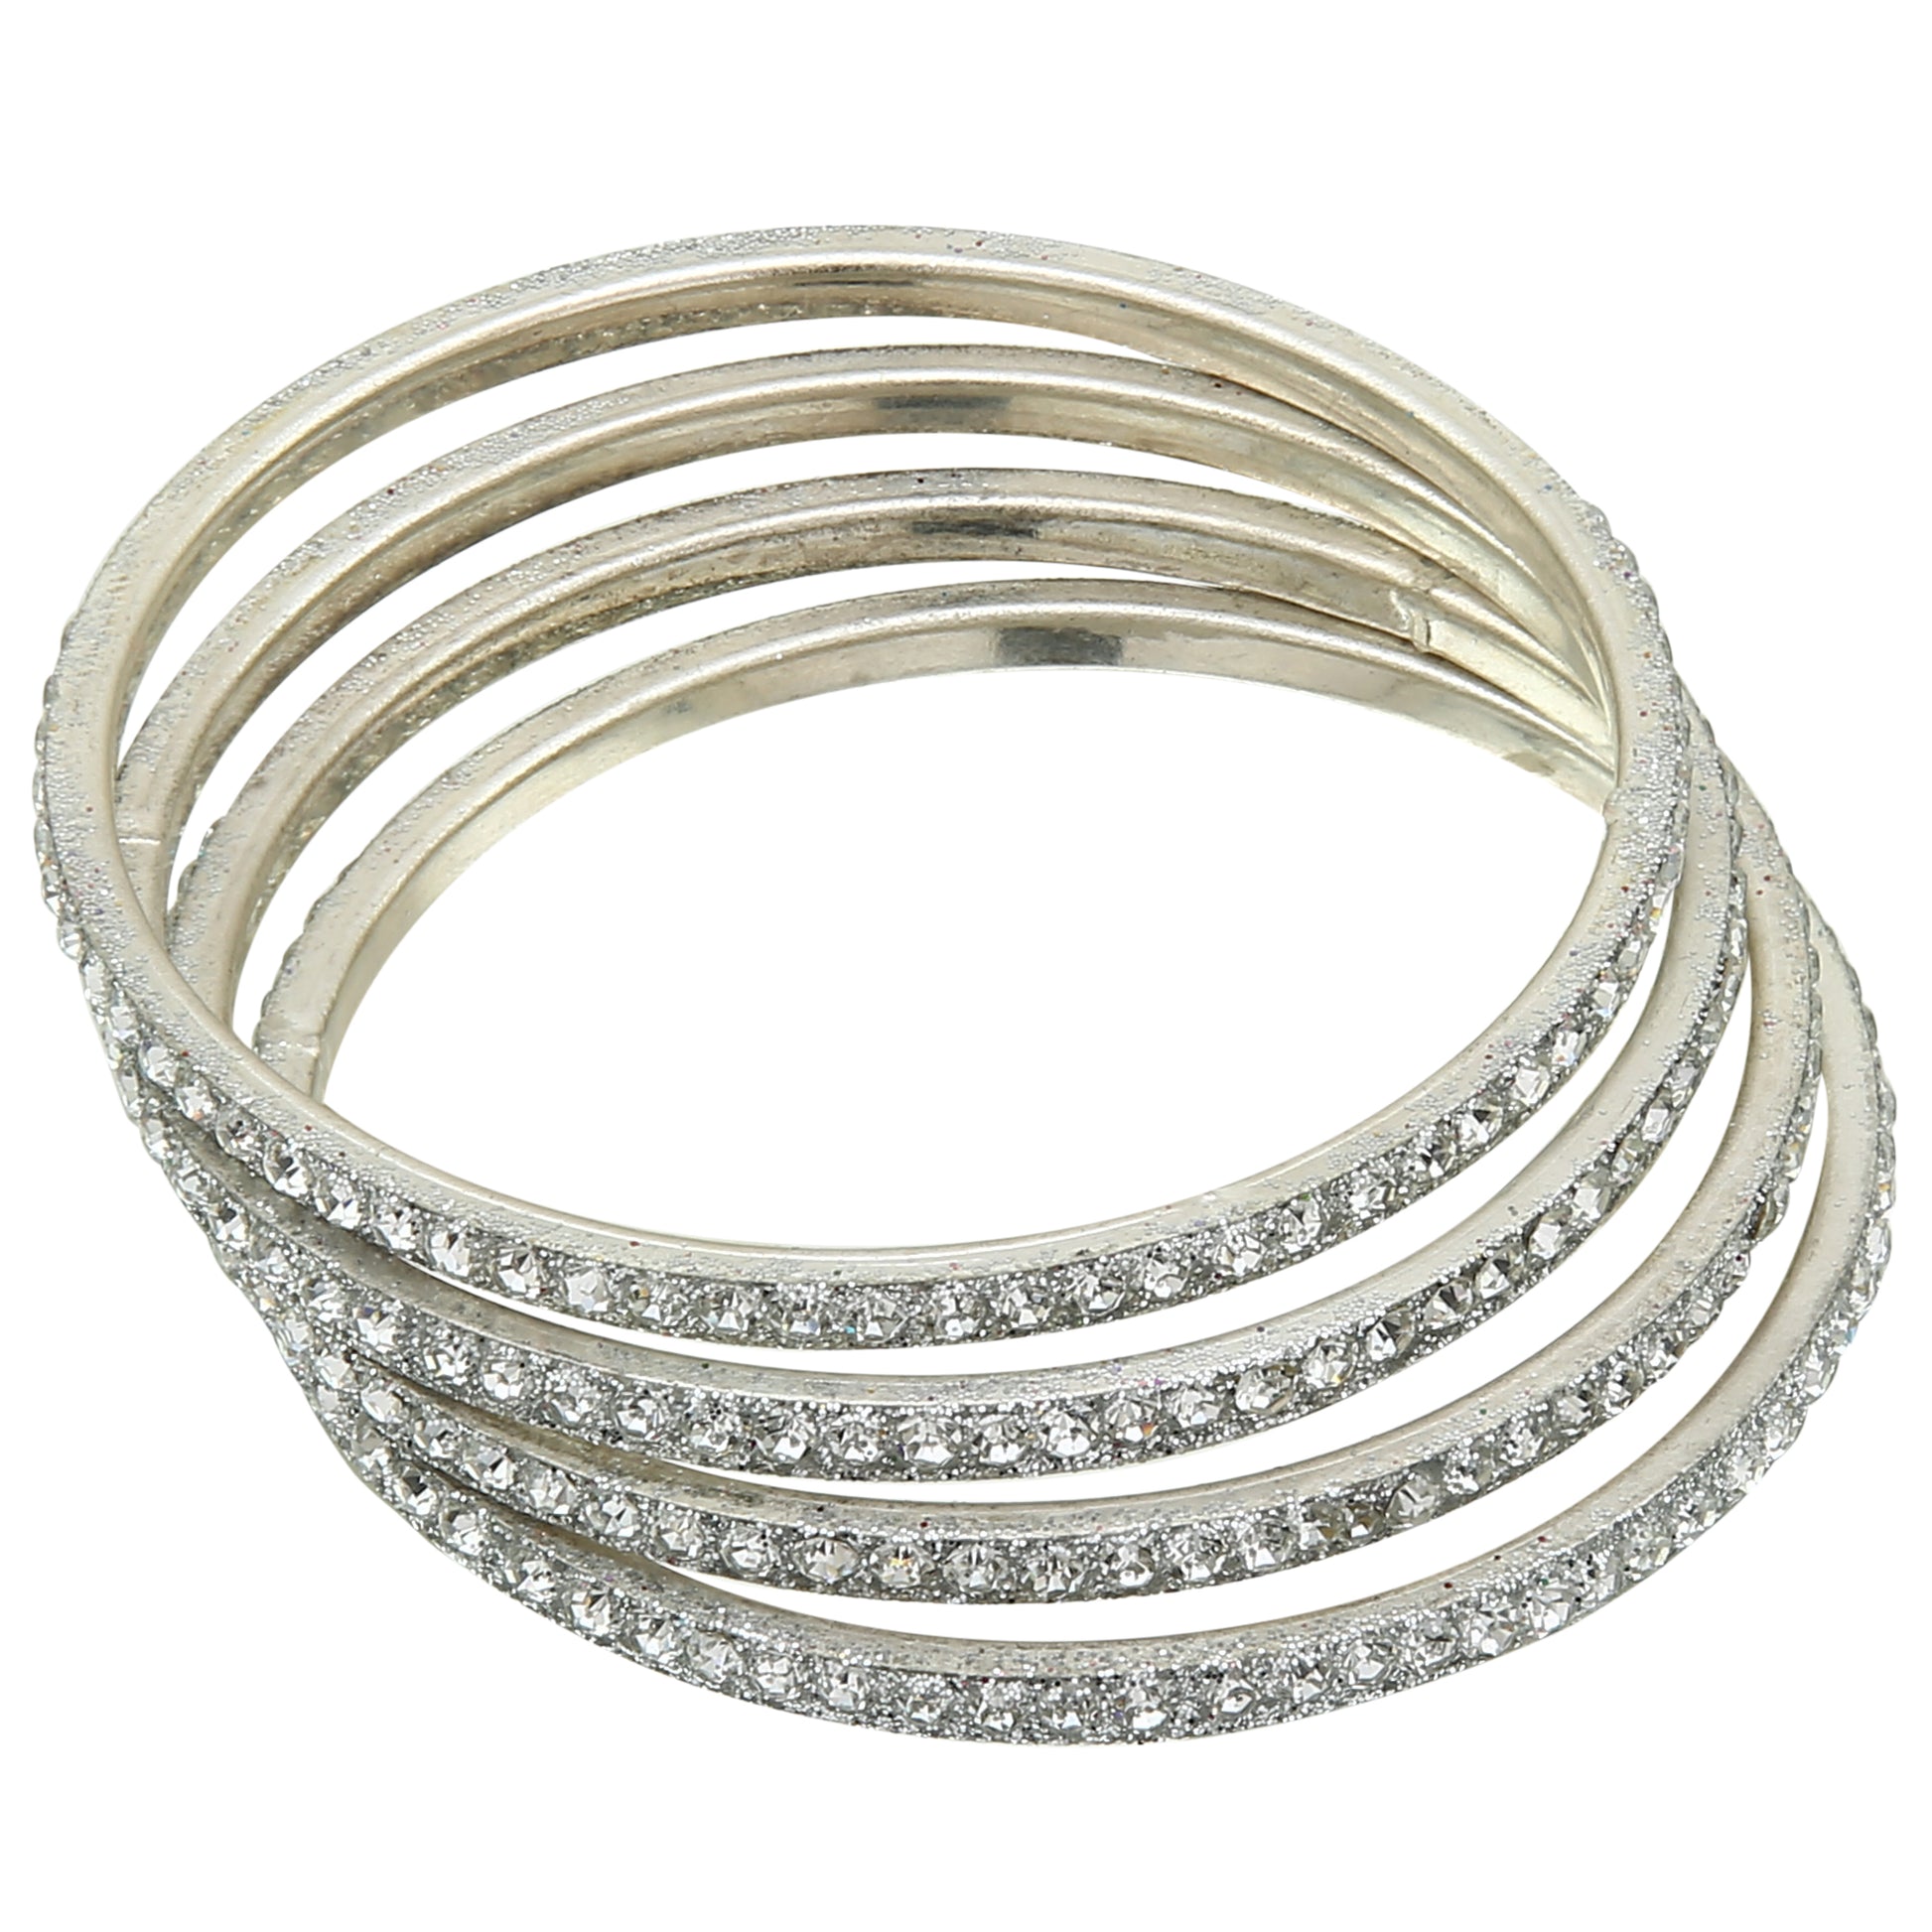 sukriti partywear traditional brass white bangles for women - set of 4